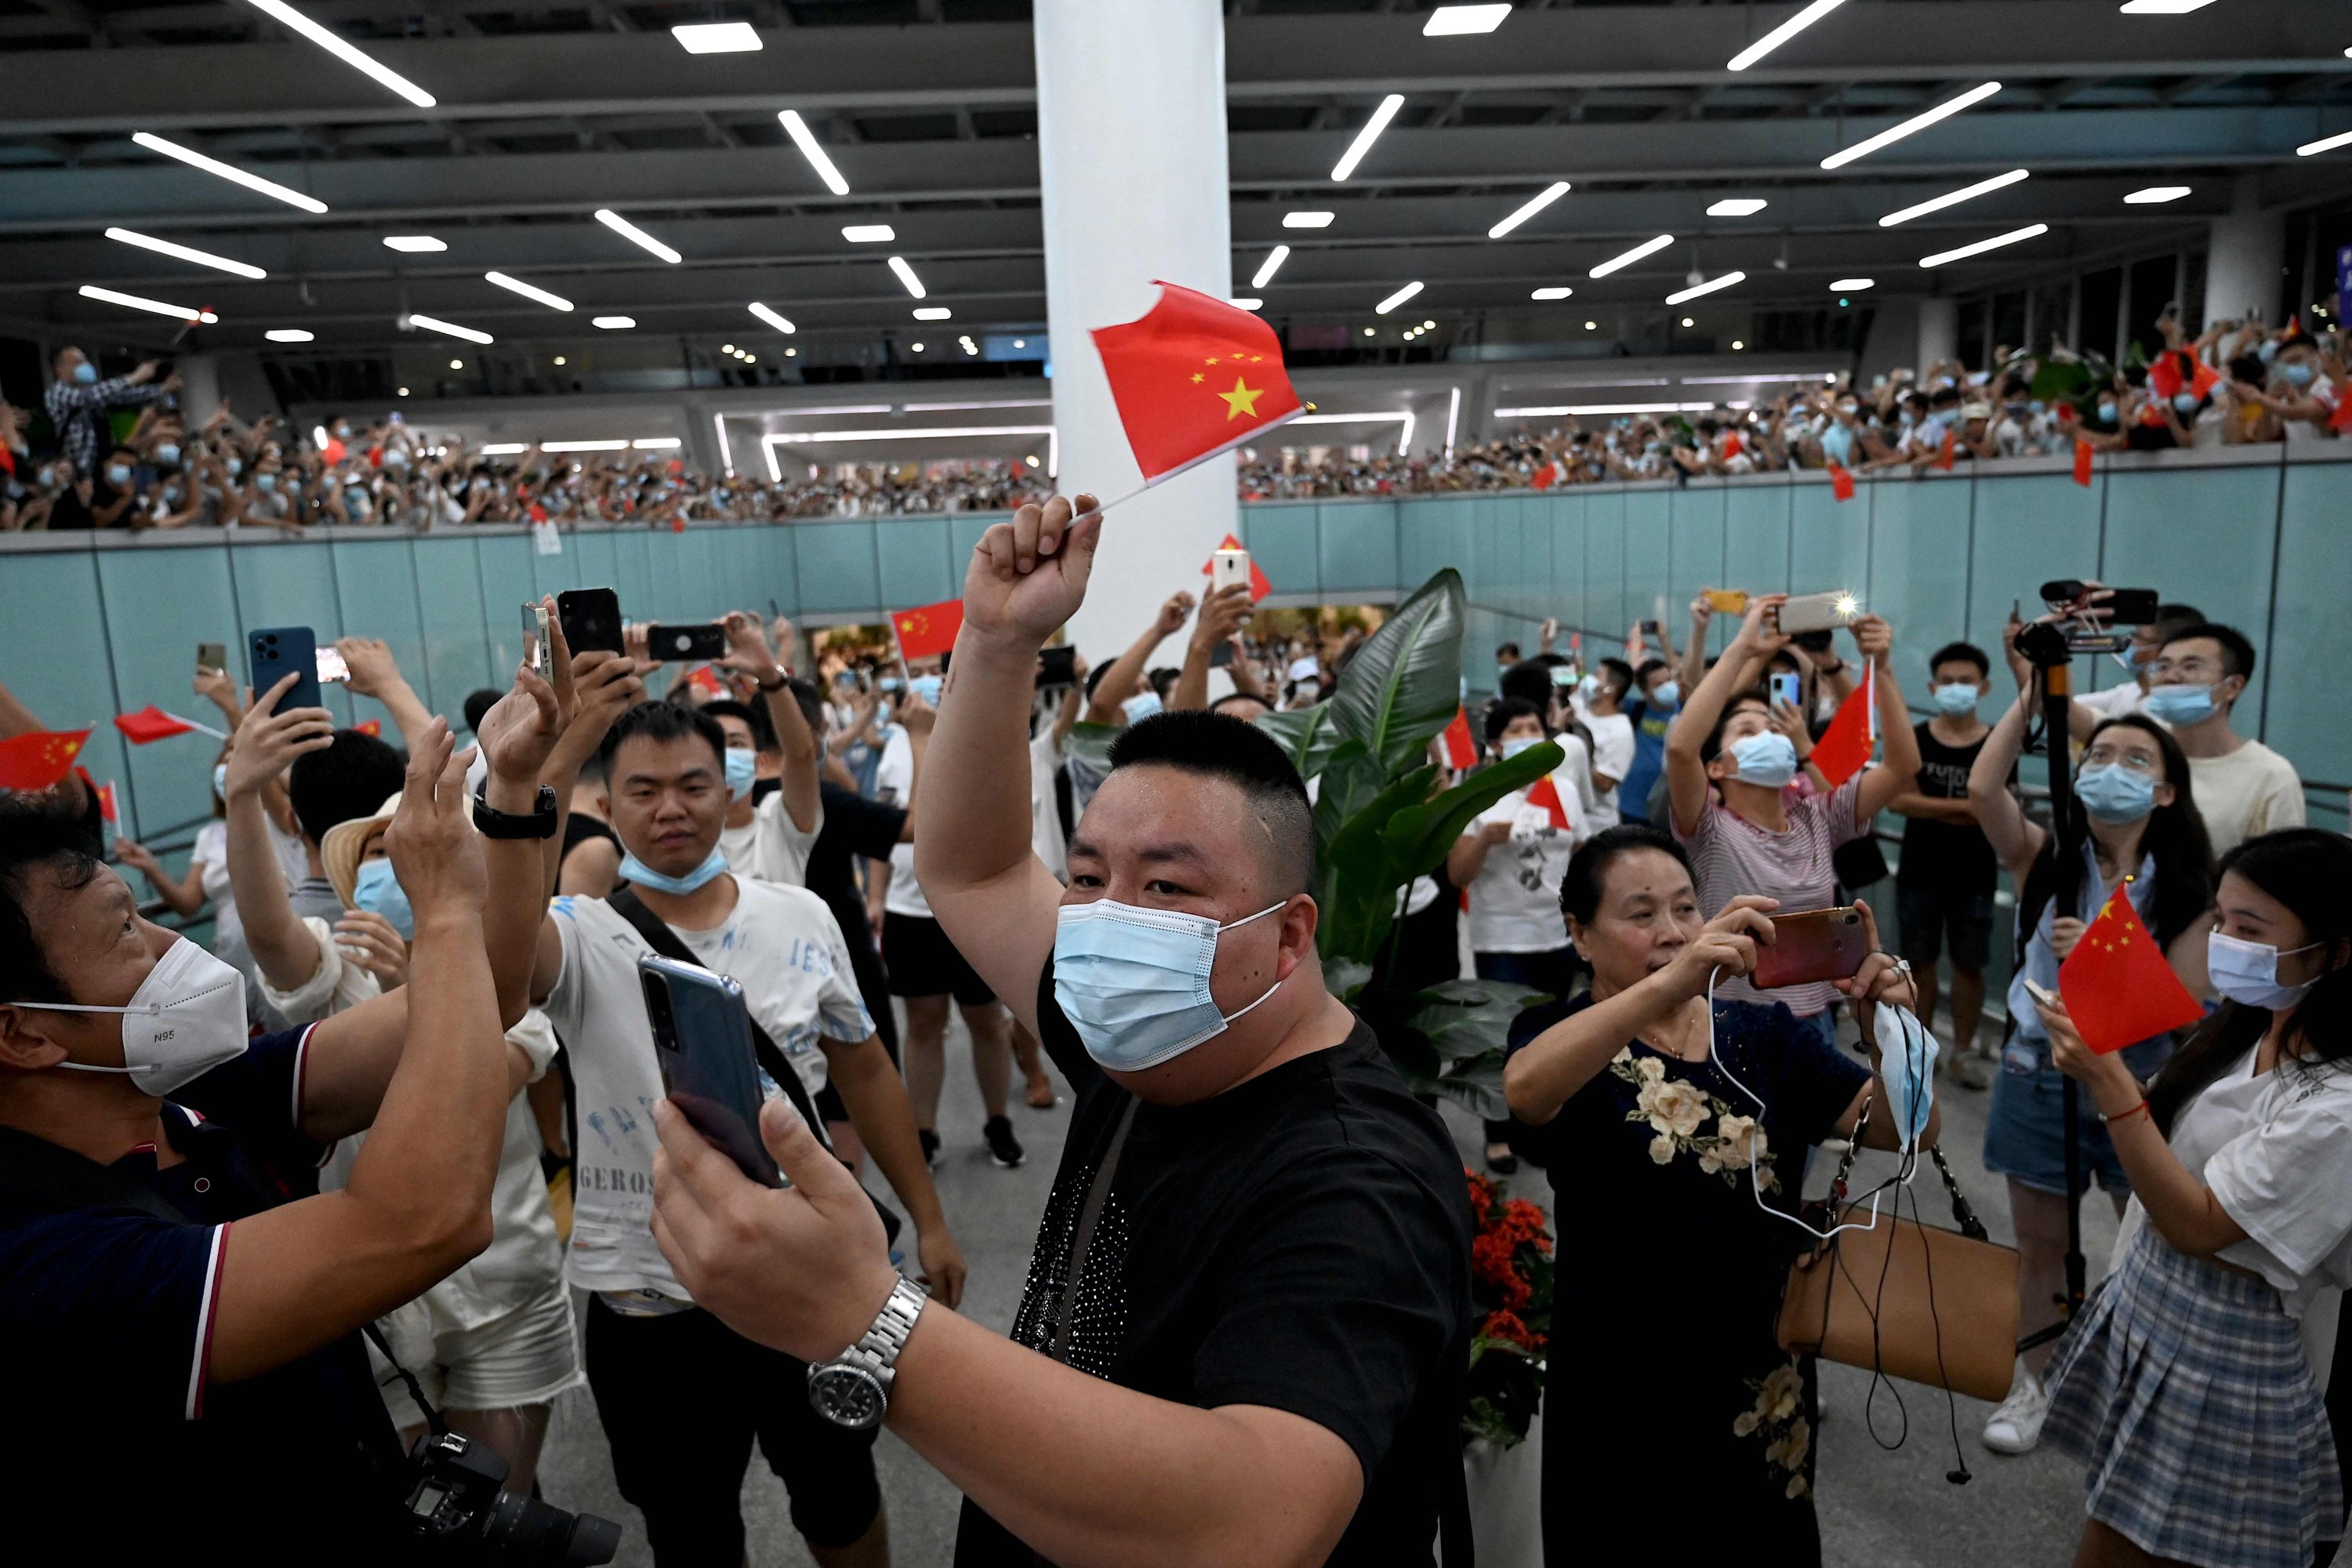 Supporters wave Chinese national flags as they wait for the arrival of Huawei CFO Meng Wanzhou at the Shenzhen Baoan International Airport in Shenzhen, Guangdong Province, China, Sept. 25, 2021. (AFP Photo)